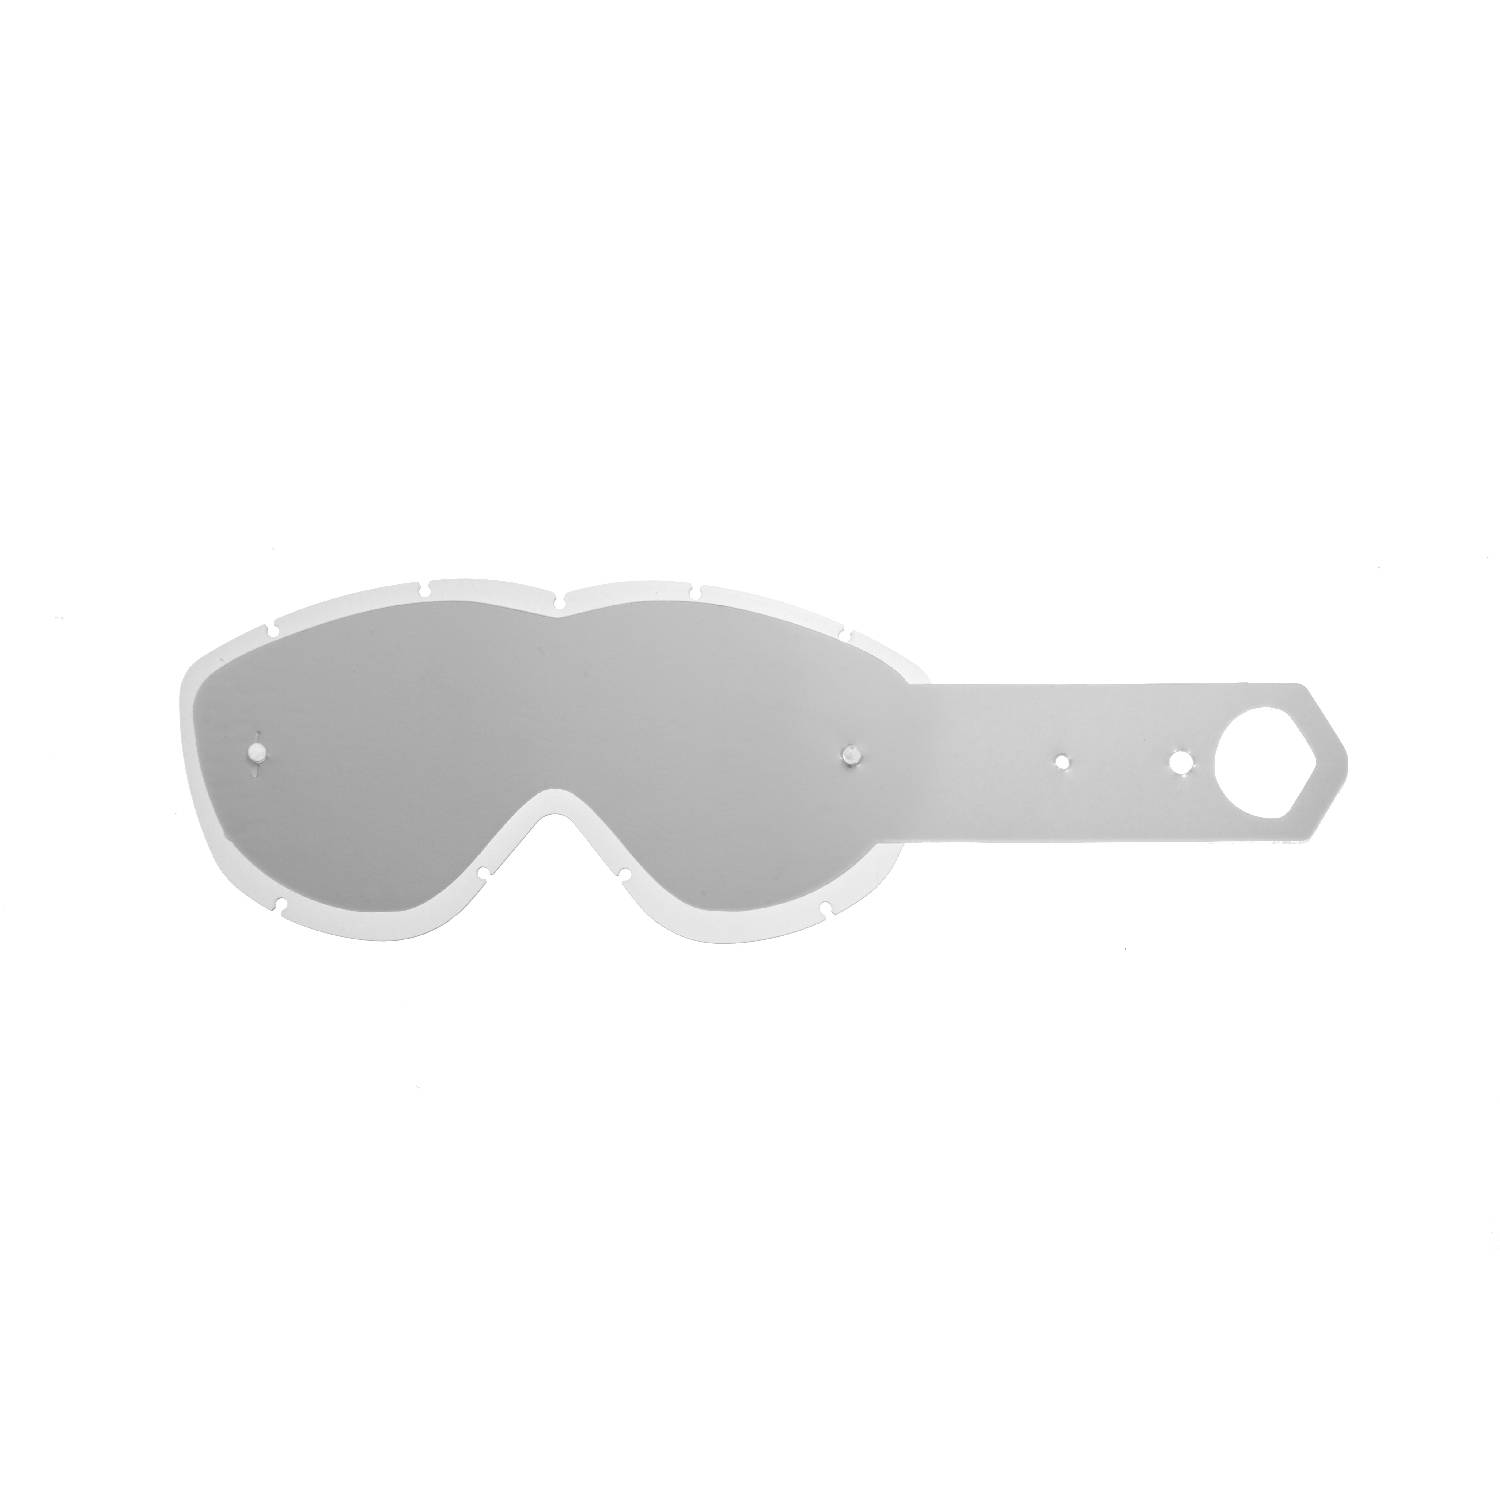 combo lenses with clear lenses with 10 tear off compatible for Spy Alloy / Targa goggle